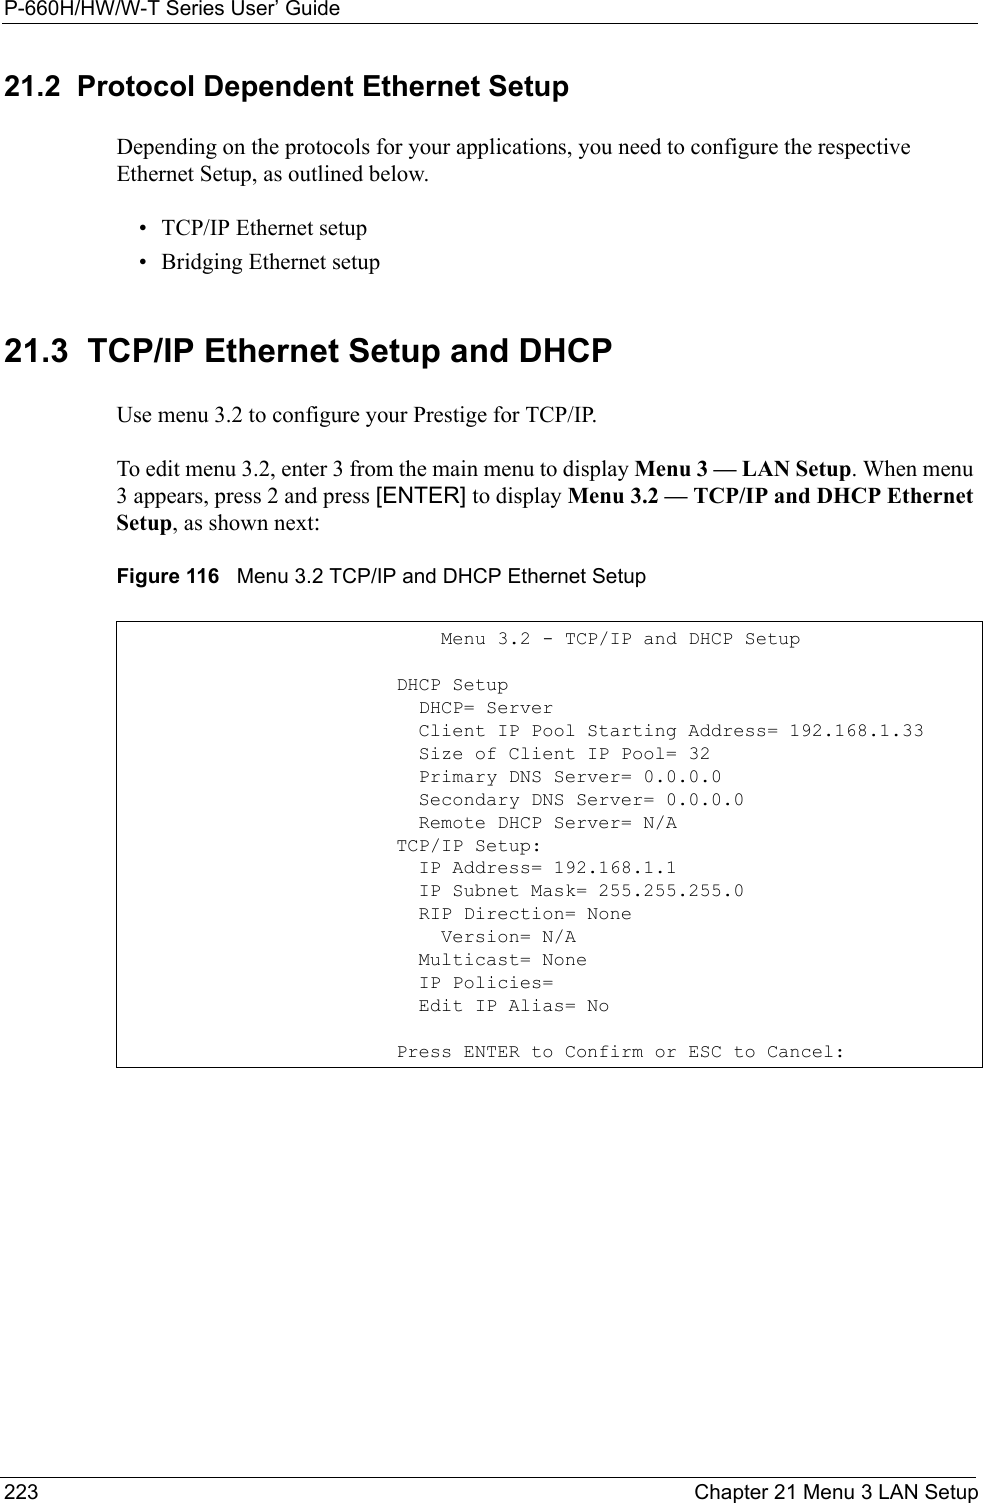 P-660H/HW/W-T Series User’ Guide223 Chapter 21 Menu 3 LAN Setup21.2  Protocol Dependent Ethernet SetupDepending on the protocols for your applications, you need to configure the respective Ethernet Setup, as outlined below.• TCP/IP Ethernet setup• Bridging Ethernet setup21.3  TCP/IP Ethernet Setup and DHCPUse menu 3.2 to configure your Prestige for TCP/IP.To edit menu 3.2, enter 3 from the main menu to display Menu 3 — LAN Setup. When menu 3 appears, press 2 and press [ENTER] to display Menu 3.2 — TCP/IP and DHCP Ethernet Setup, as shown next:Figure 116   Menu 3.2 TCP/IP and DHCP Ethernet Setup               Menu 3.2 - TCP/IP and DHCP Setup           DHCP Setup             DHCP= Server             Client IP Pool Starting Address= 192.168.1.33             Size of Client IP Pool= 32             Primary DNS Server= 0.0.0.0             Secondary DNS Server= 0.0.0.0             Remote DHCP Server= N/A           TCP/IP Setup:             IP Address= 192.168.1.1             IP Subnet Mask= 255.255.255.0             RIP Direction= None               Version= N/A             Multicast= None             IP Policies=             Edit IP Alias= No           Press ENTER to Confirm or ESC to Cancel: